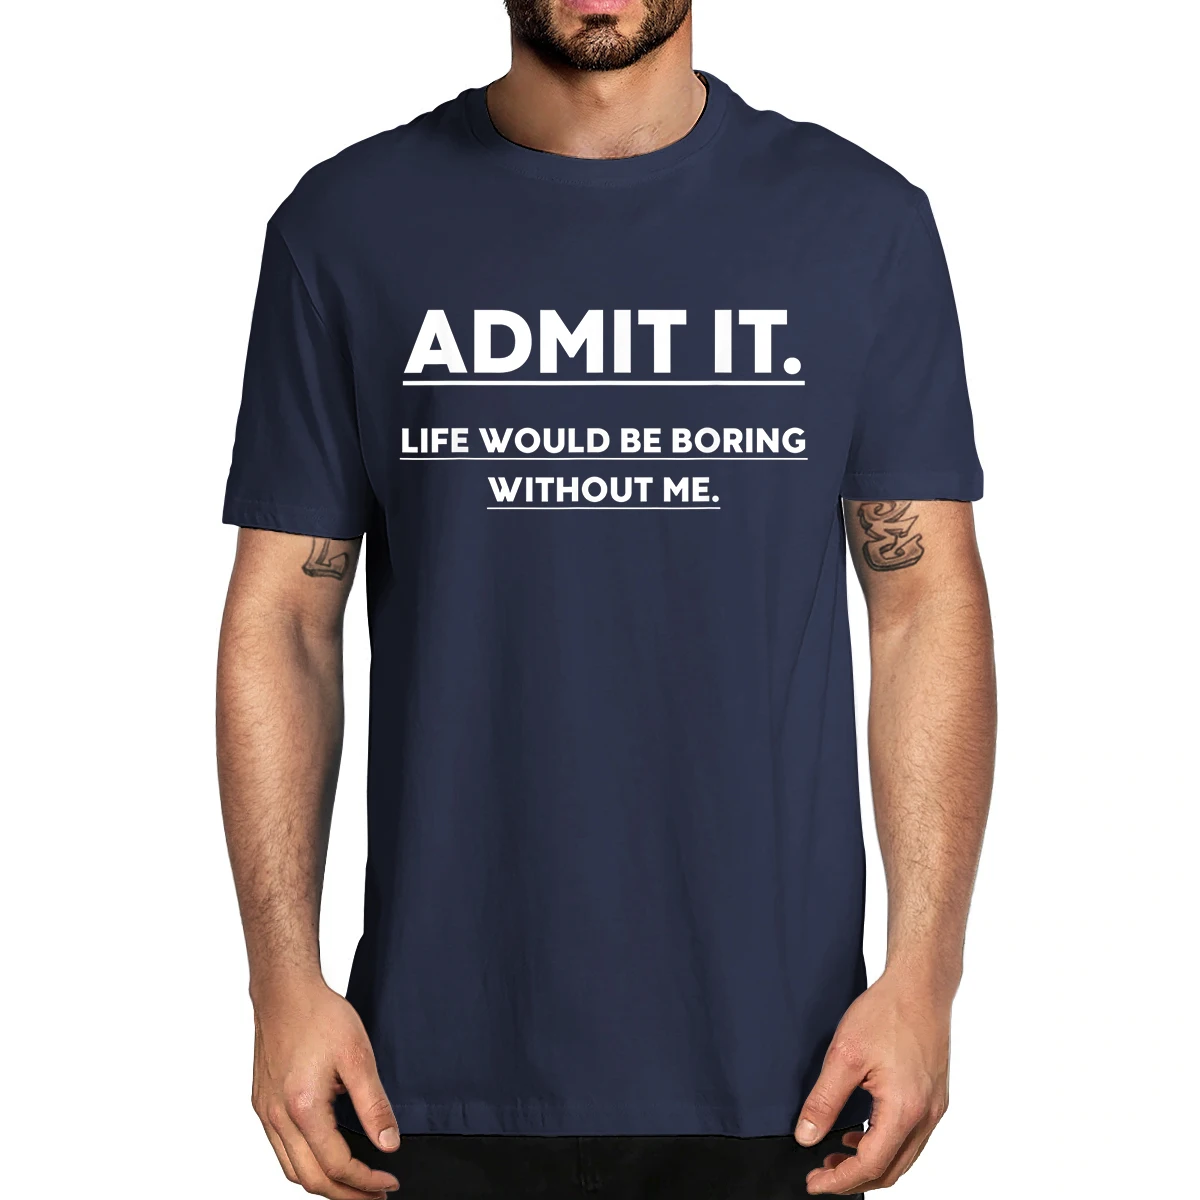 

XS-5XL 100% Cotton Admit It Life Would Be Boring Without Me Funny Saying Funny Men's Novelty T-Shirt Soft Tee Casual Streetwear